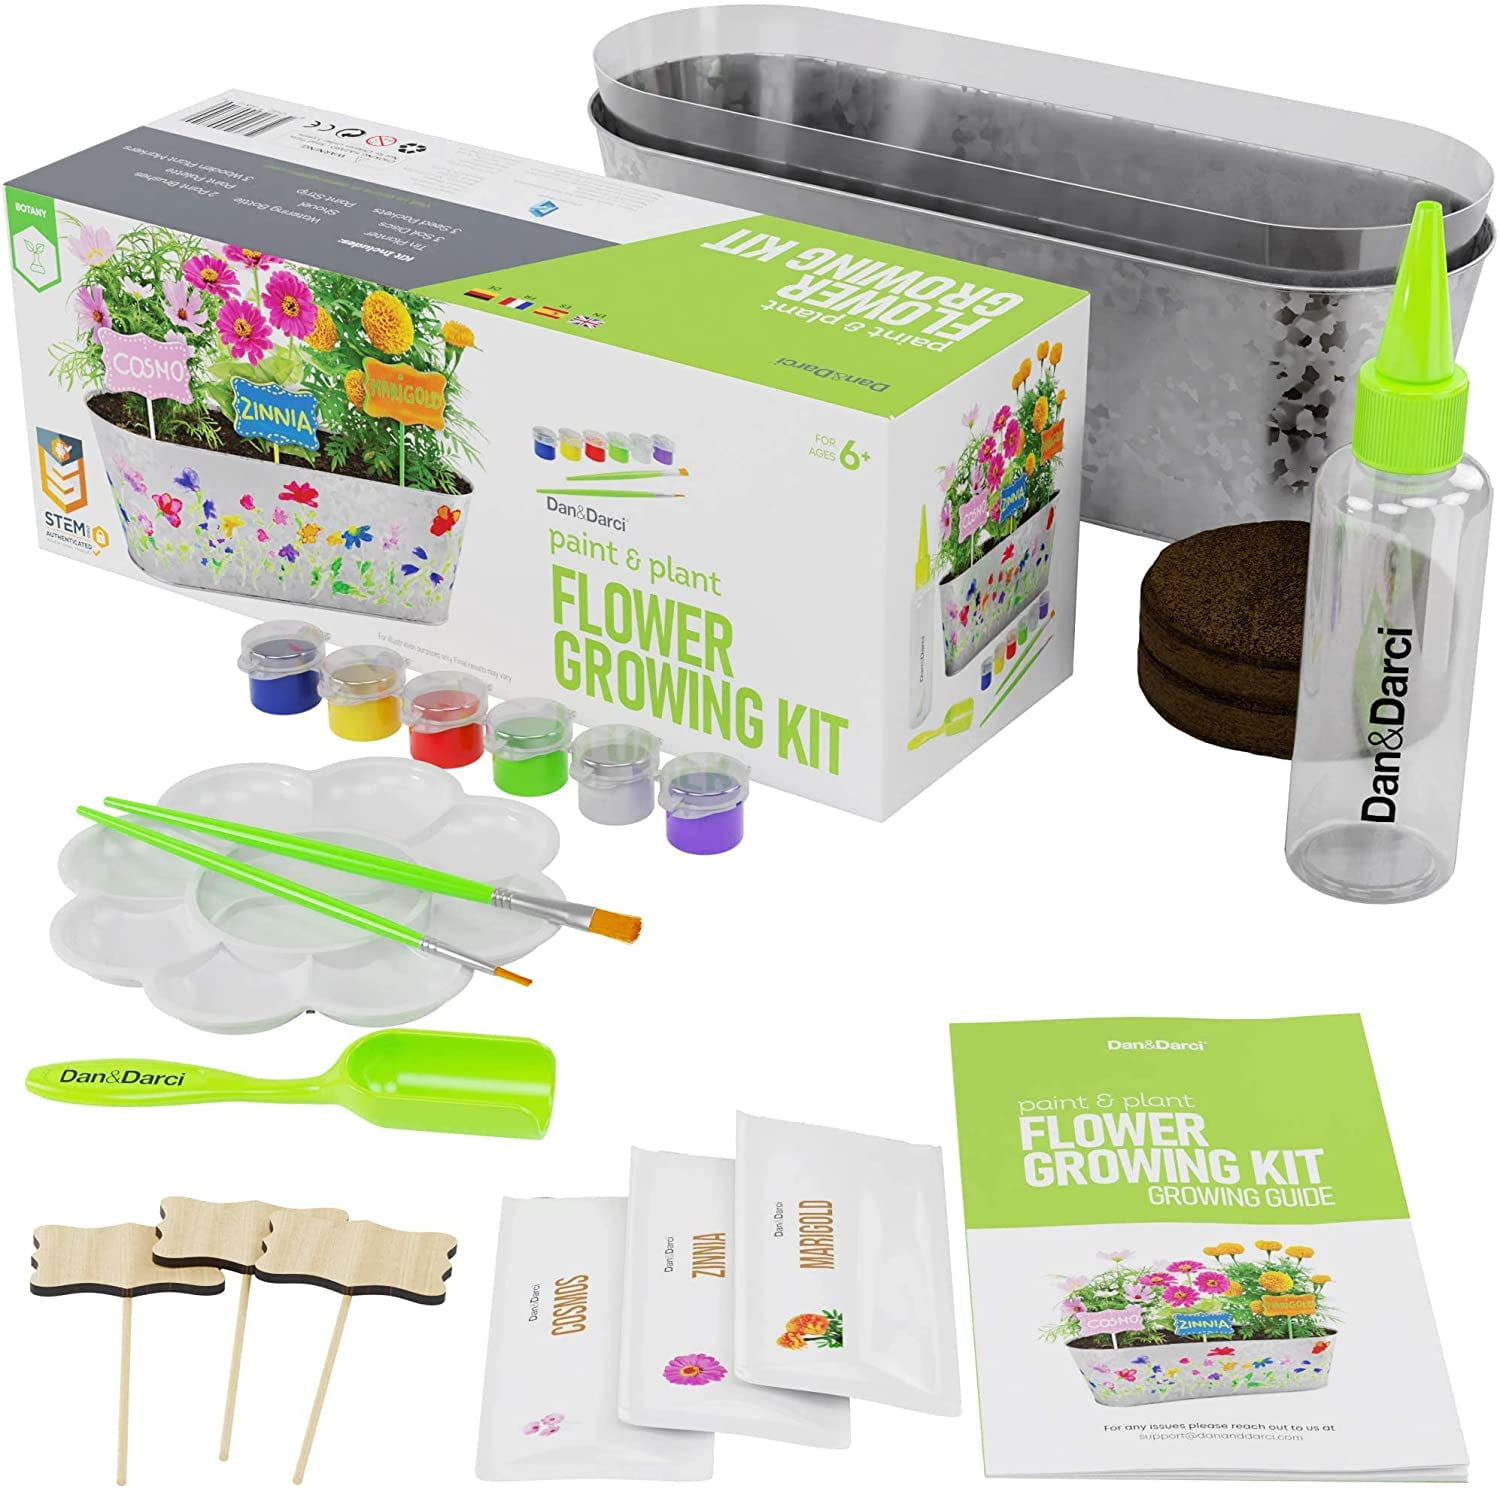 12 Years Old 11 7 Planting Kit for Girls and Boys Gardening Arts & Crafts Set for Kids 5 9,10 Paint & Planting Flower Growing Kit for Kids 8 6 Children Christmas Toy Gifts 